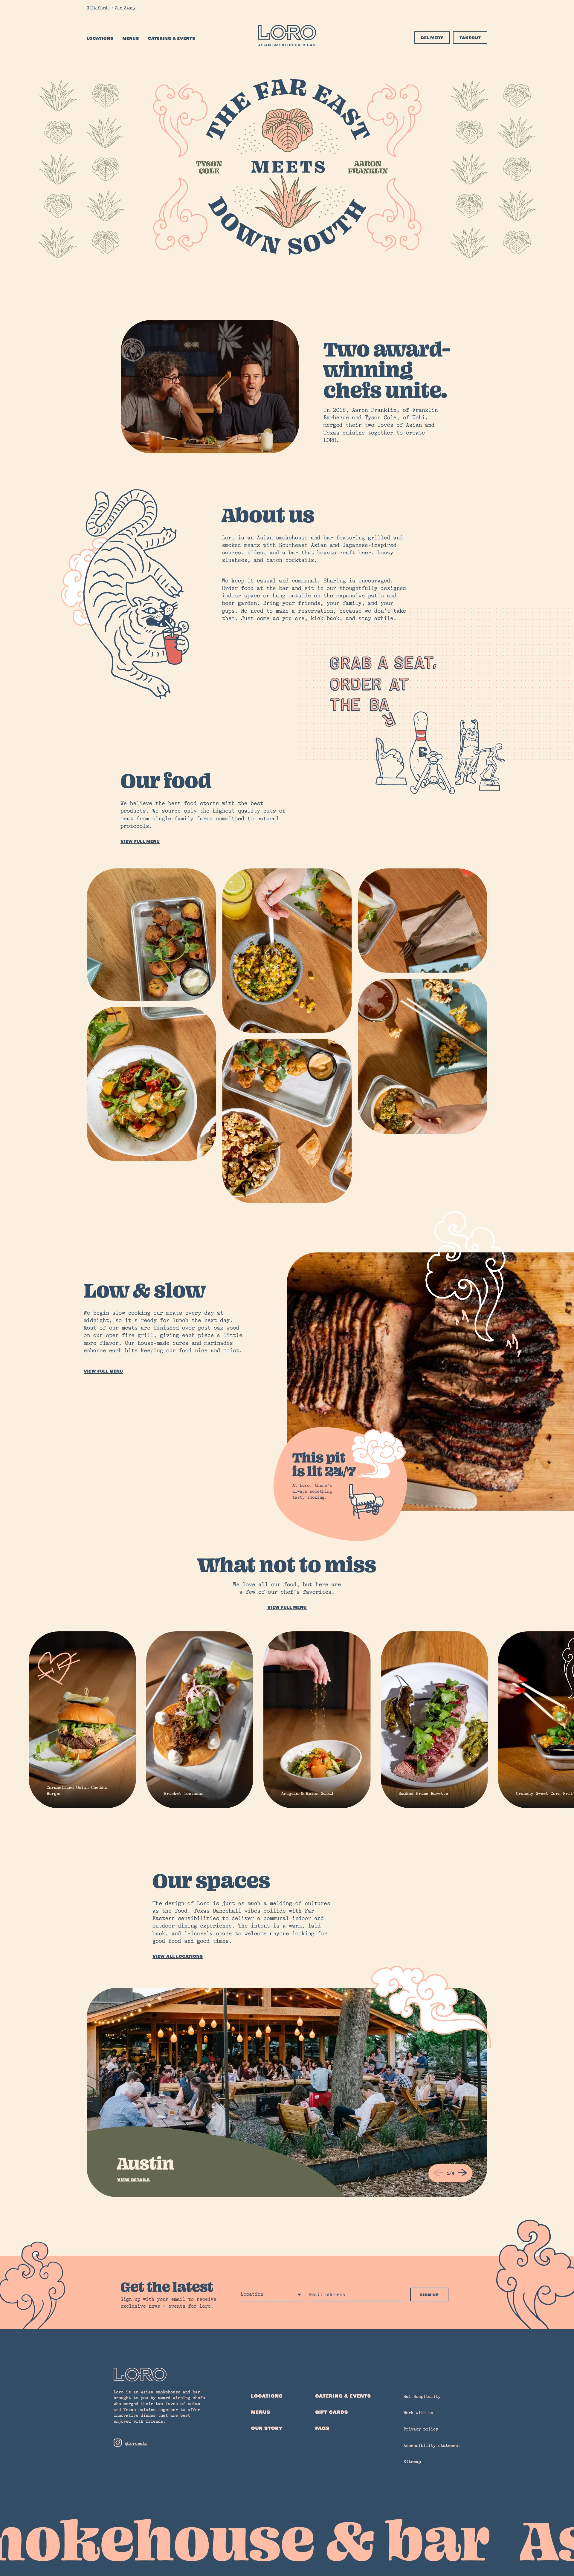 Loro Landing Page Example: Loro is an Asian smokehouse and bar brought to you by the award-winning chefs behind Uchi and Franklin Barbecue.